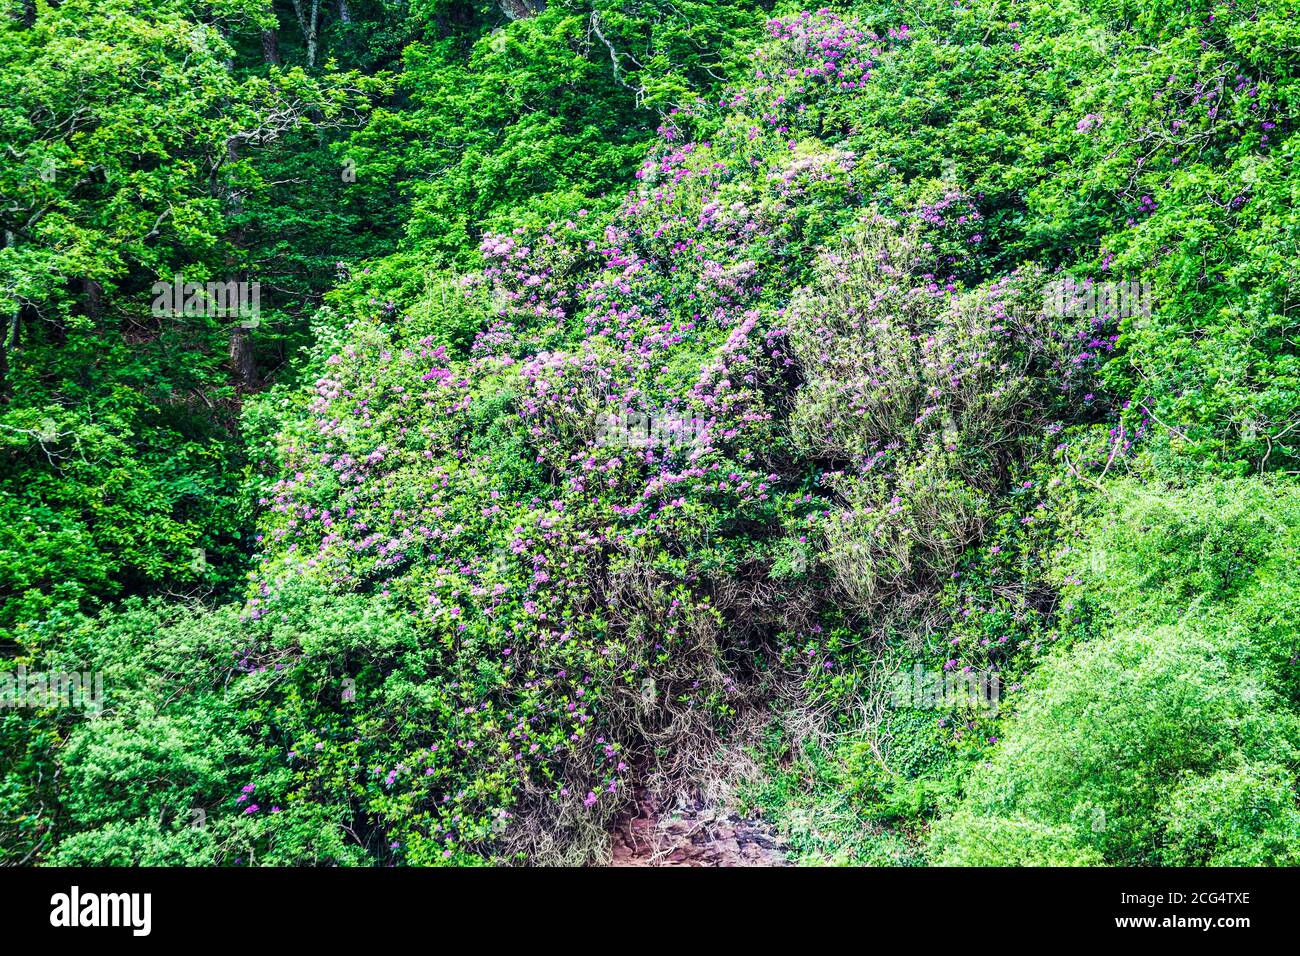 The flowering rhododendrons at Woody Bay in the Exmoor National Park, Devon. Stock Photo